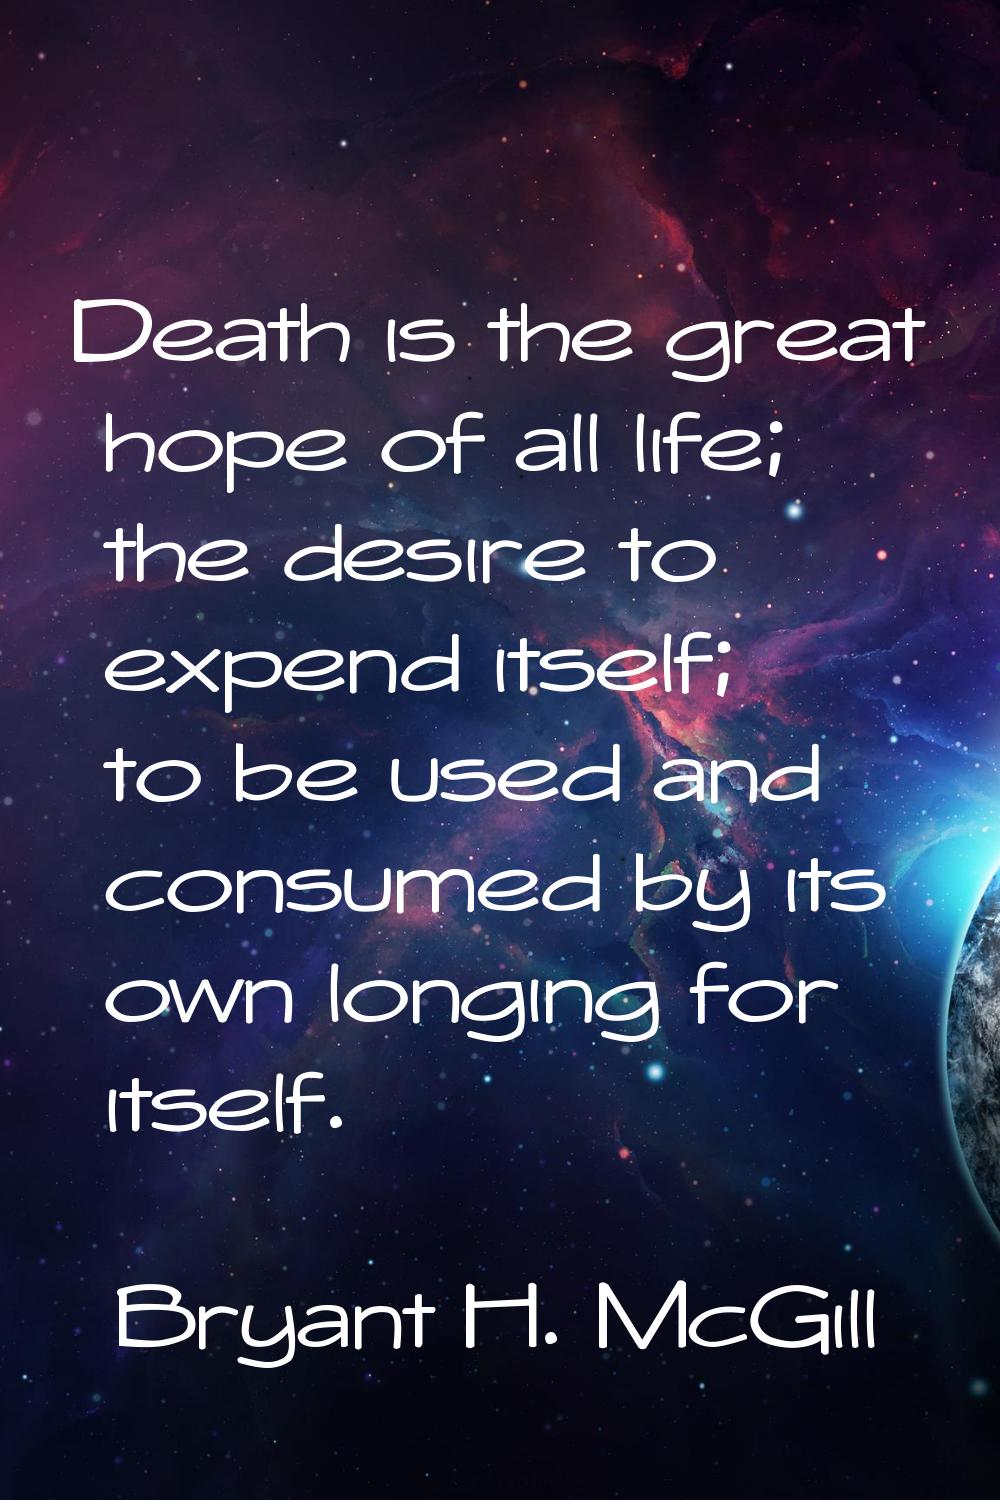 Death is the great hope of all life; the desire to expend itself; to be used and consumed by its ow